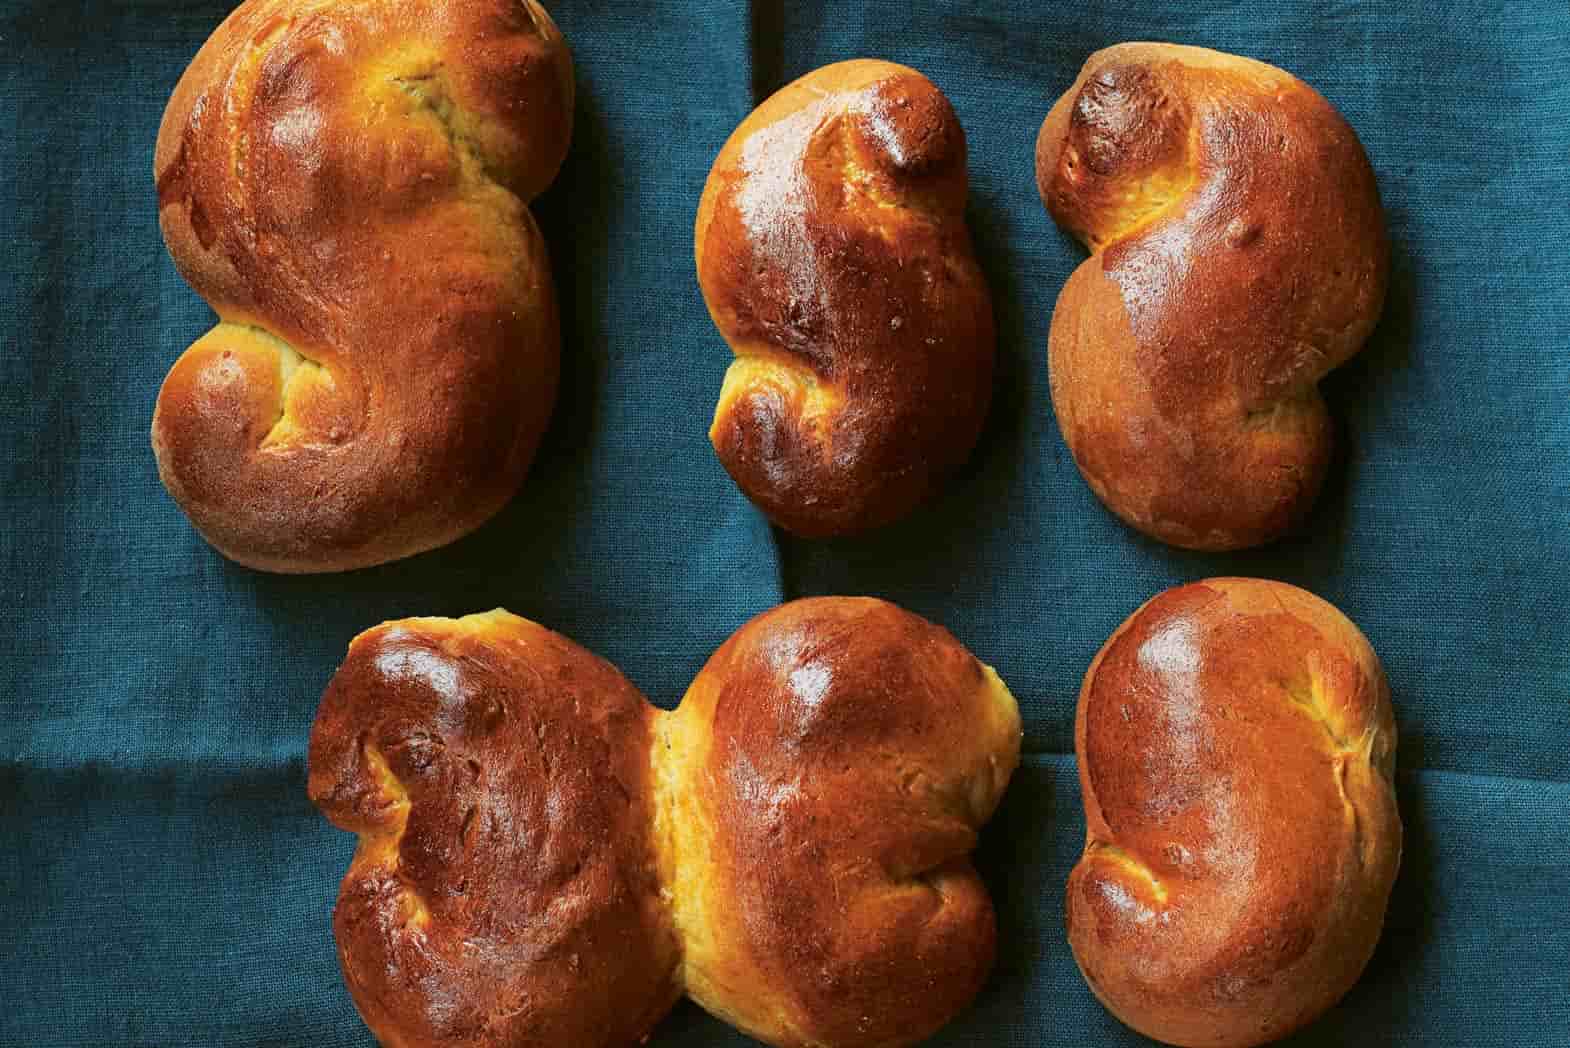 How to make traditional Danish saffron buns at home